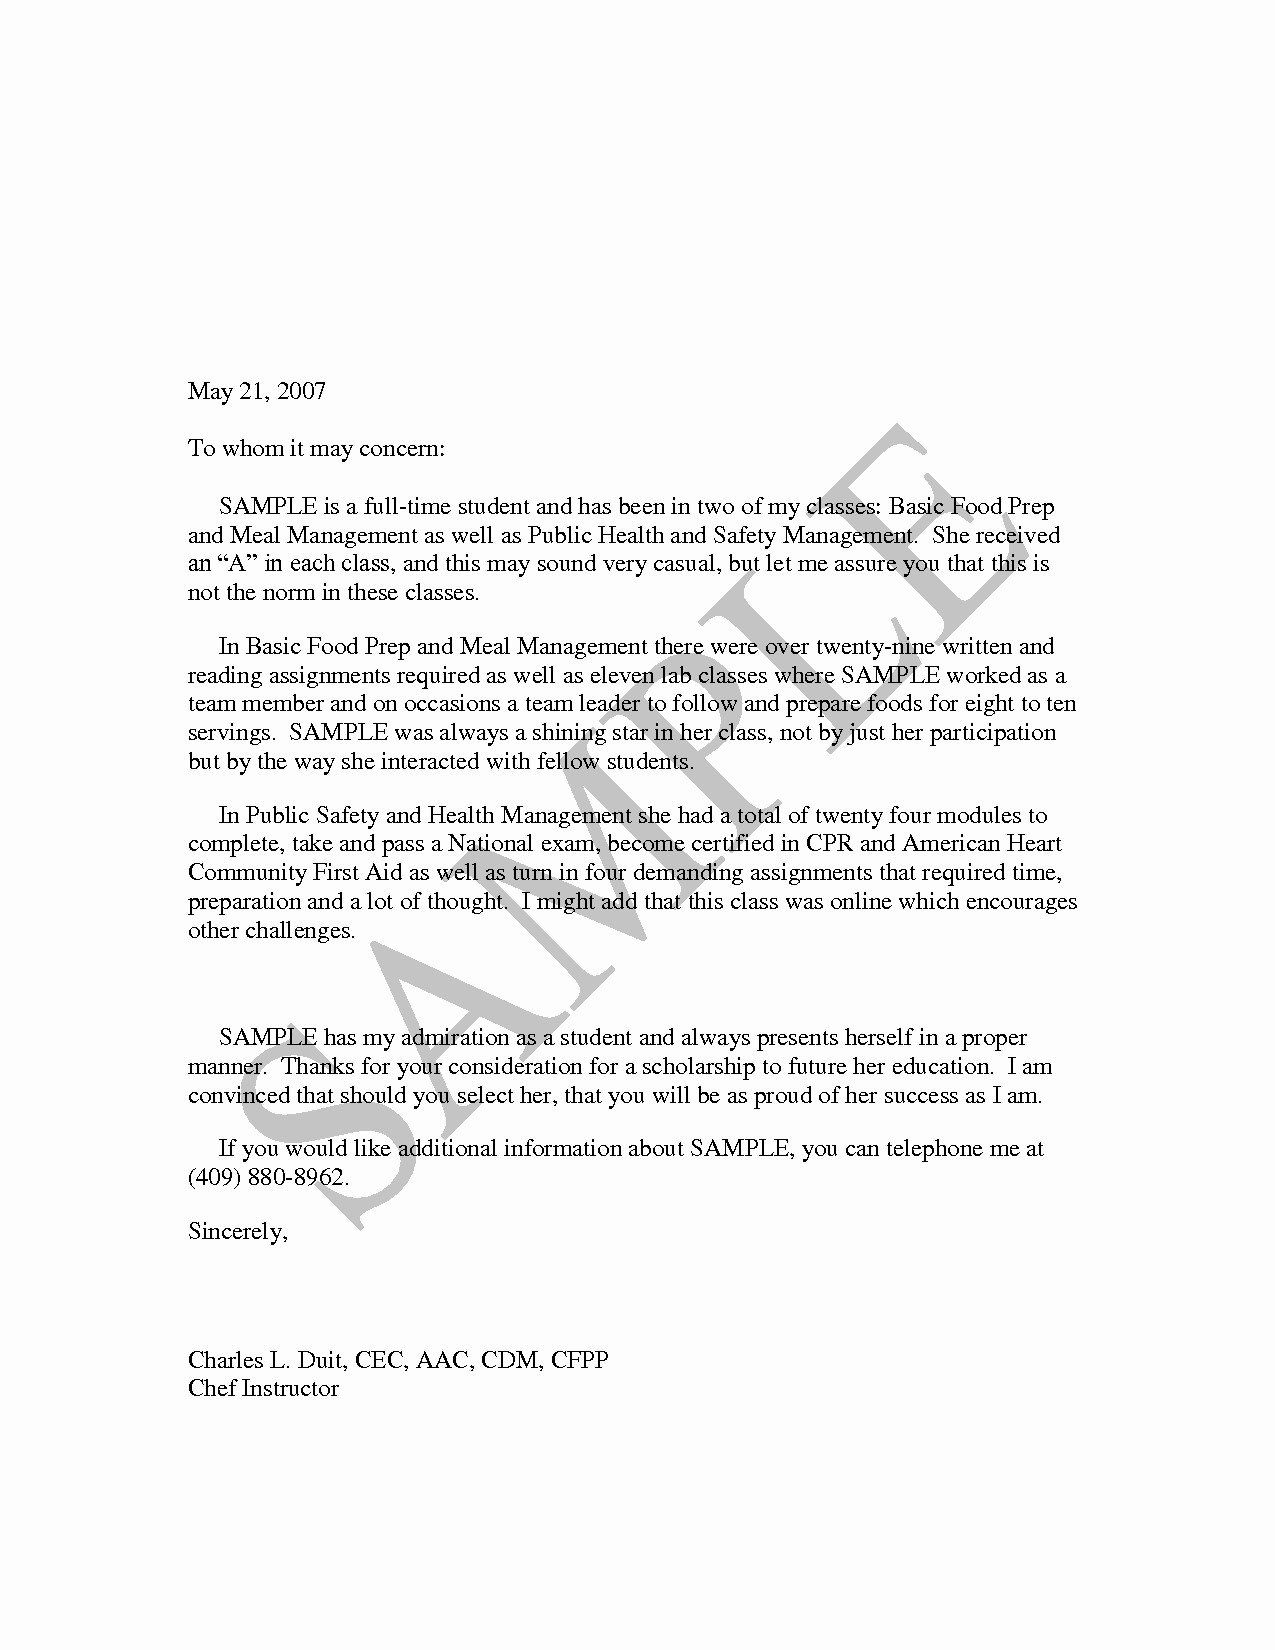 Letters Of Recommendation format Samples Inspirational Simple Example Re Mendation Letter